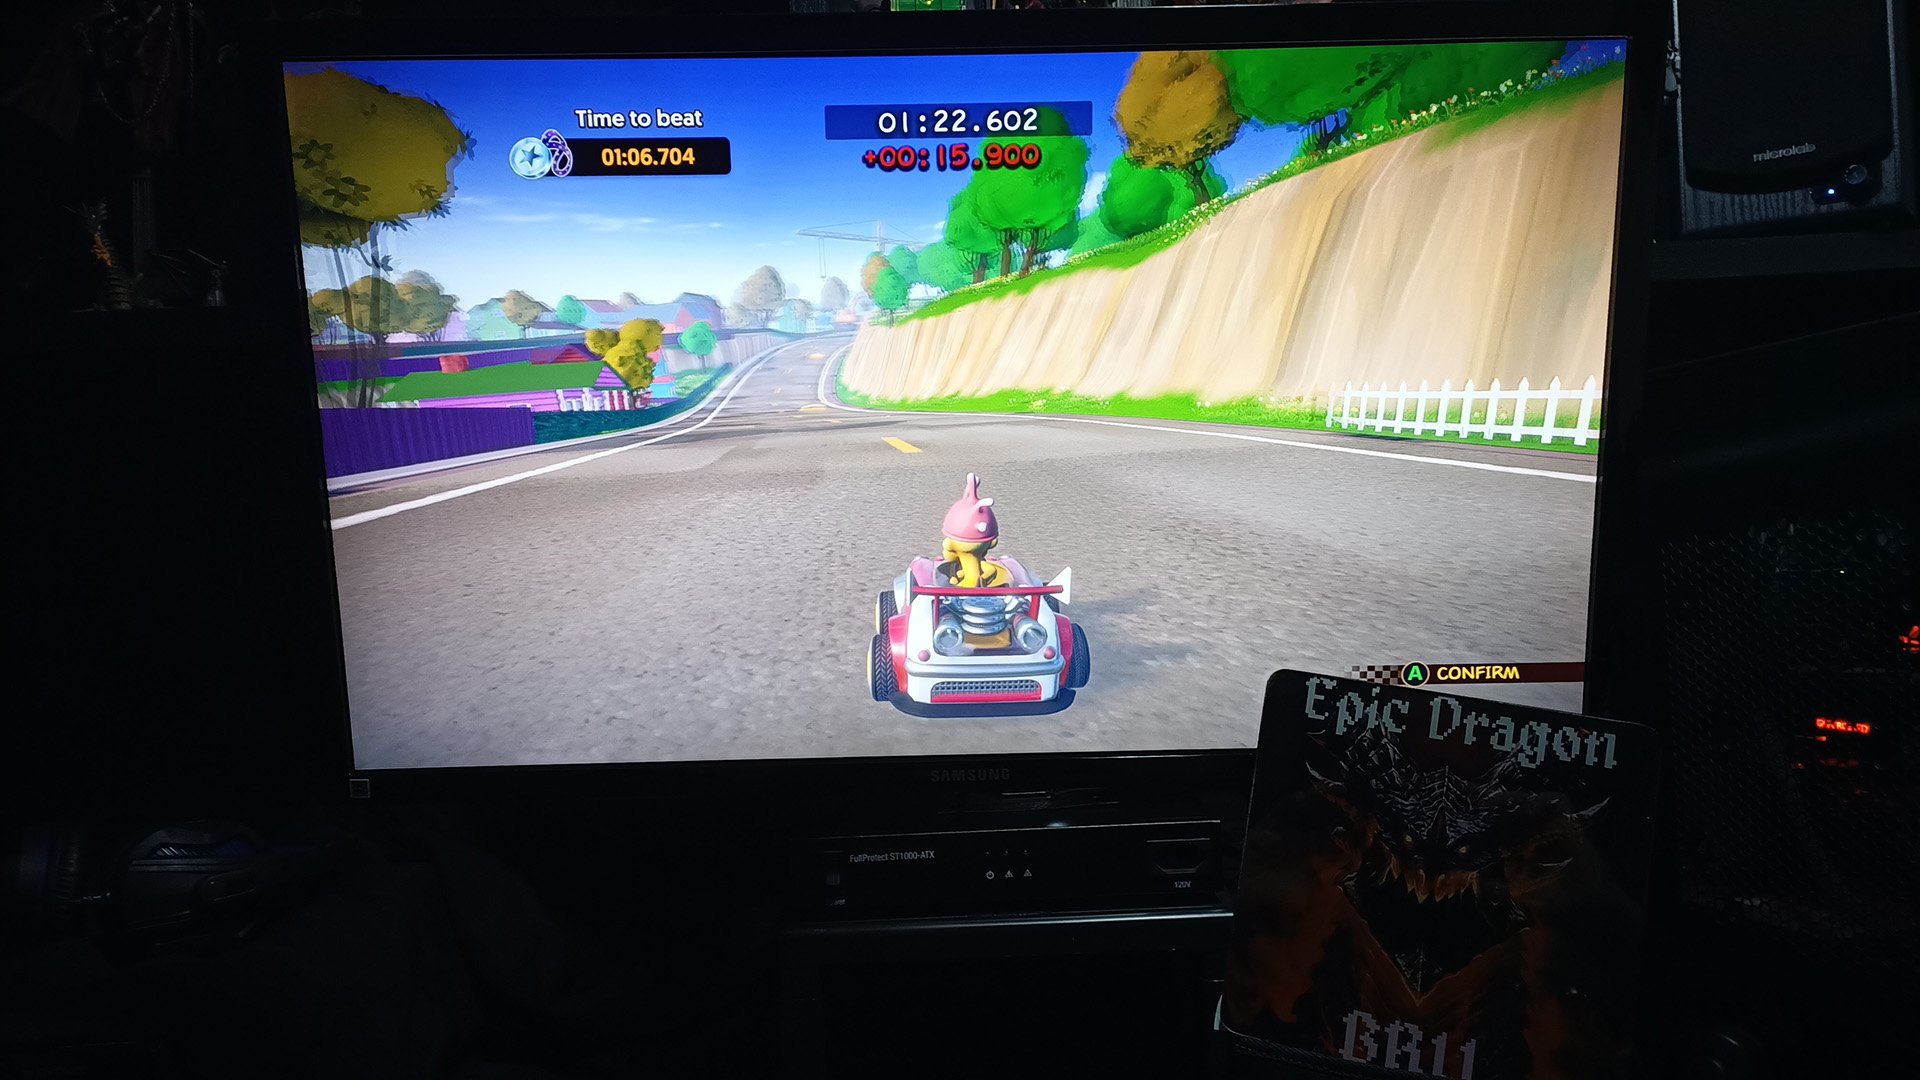 EpicDragon: Garfield Kart Furious Racing: Catz In The Hood [Time Trial: Lap Time] (PC) 0:00:25.55 points on 2022-08-05 17:27:15